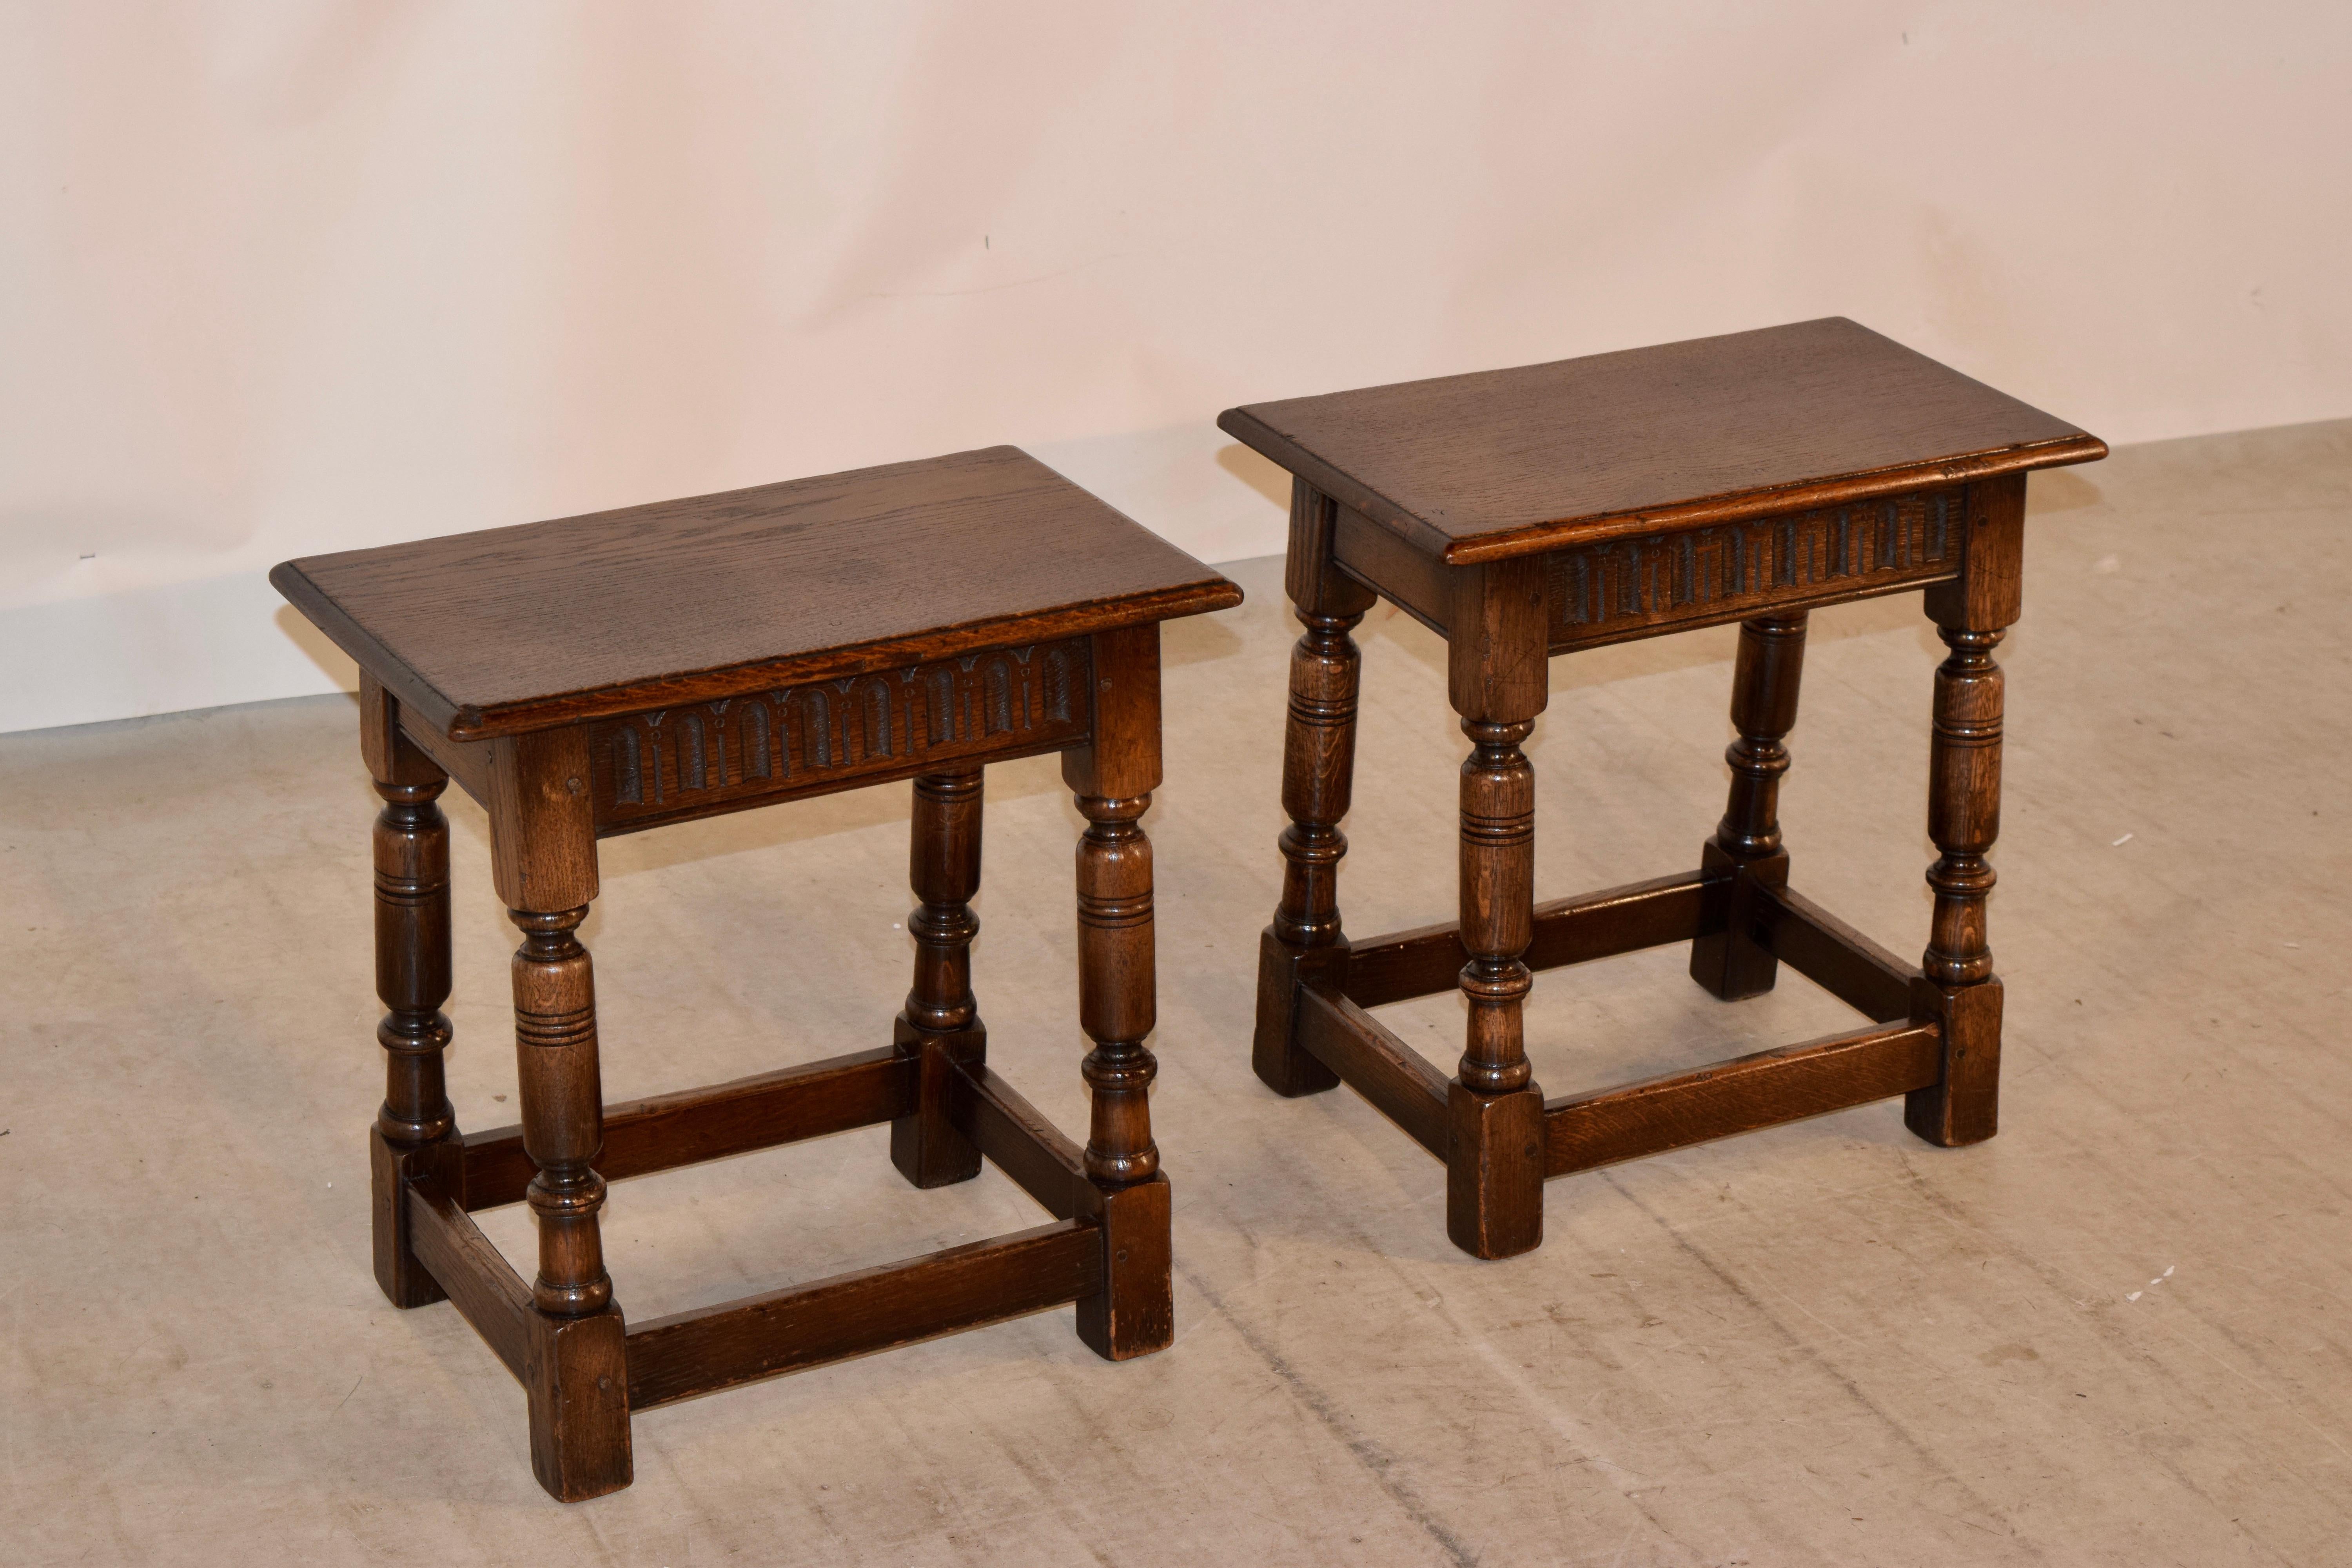 Pair of 19th century English oak joint stools with beveled edges around the seats, following down to carved simple aprons with fluted decoration and wonderfully hand turned legs joined by simple stretchers. Pegged construction.